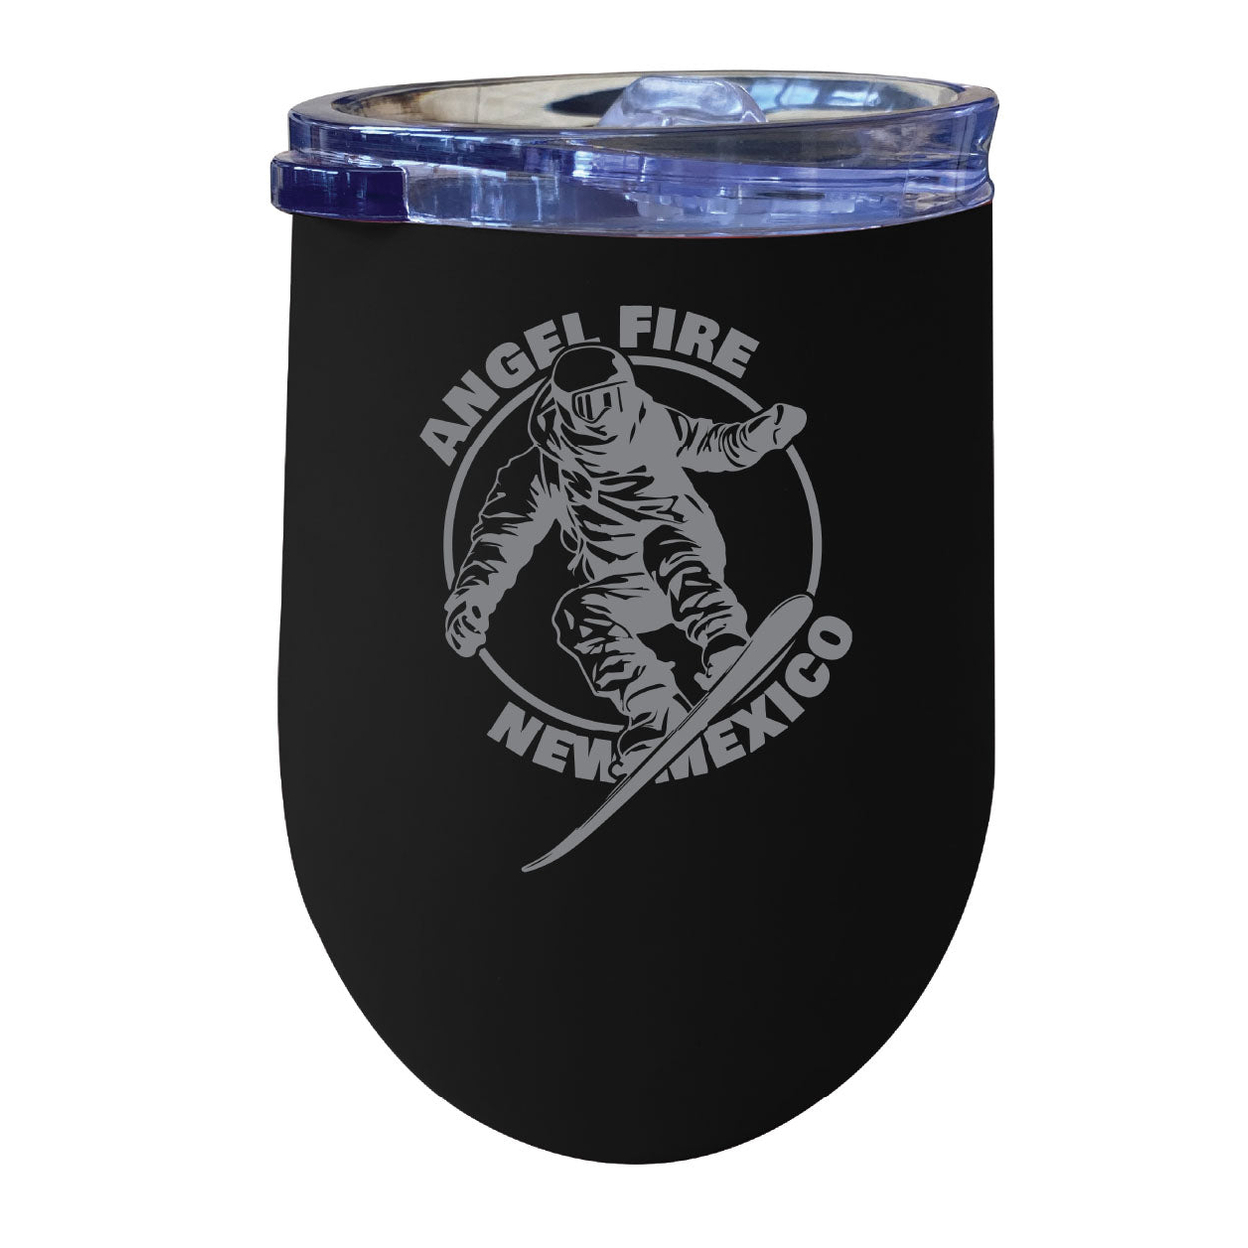 Angel Fire New Mexico Souvenir 12 Oz Engraved Insulated Wine Stainless Steel Tumbler - Black,,Single Unit